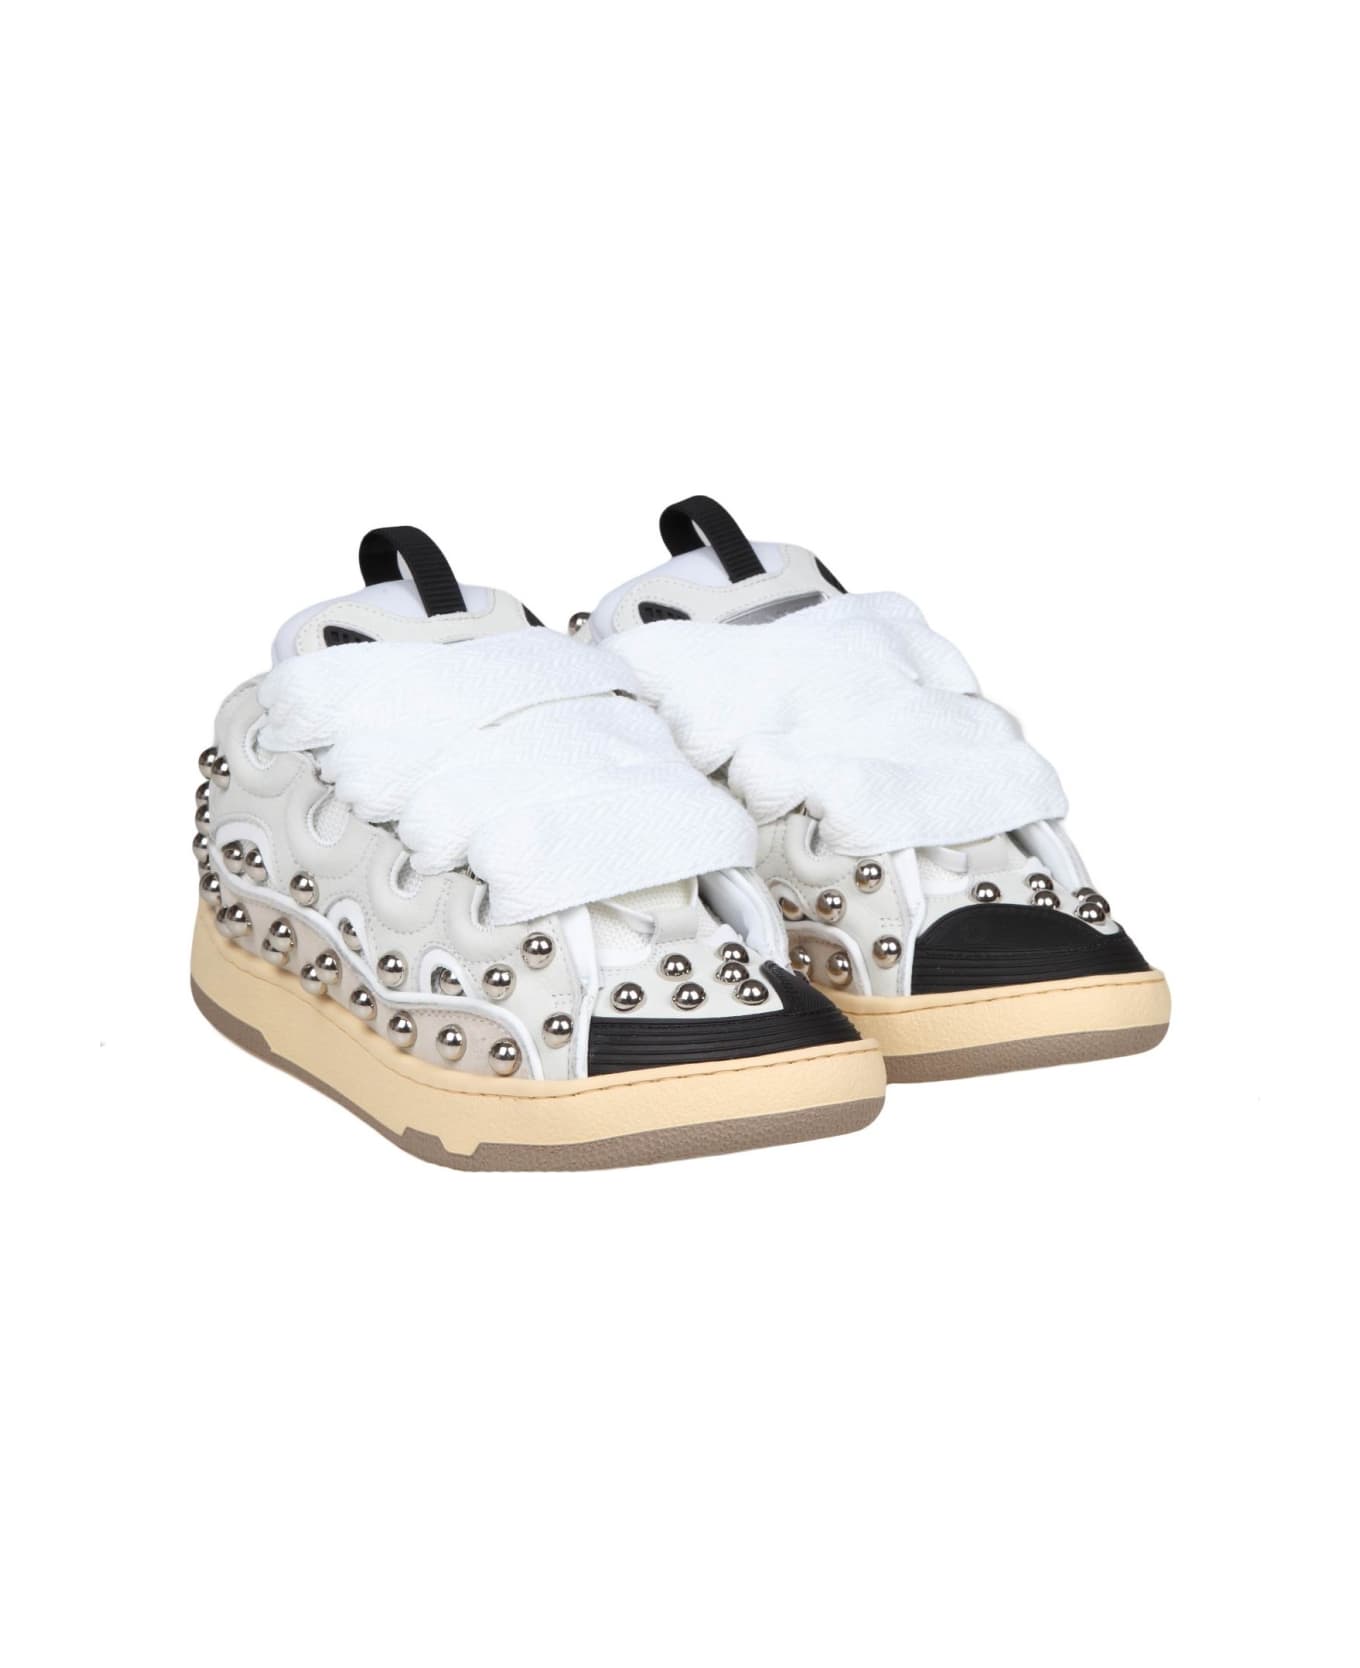 Lanvin Curb Sneakers In Black And White Leather With Applied Studs - White スニーカー